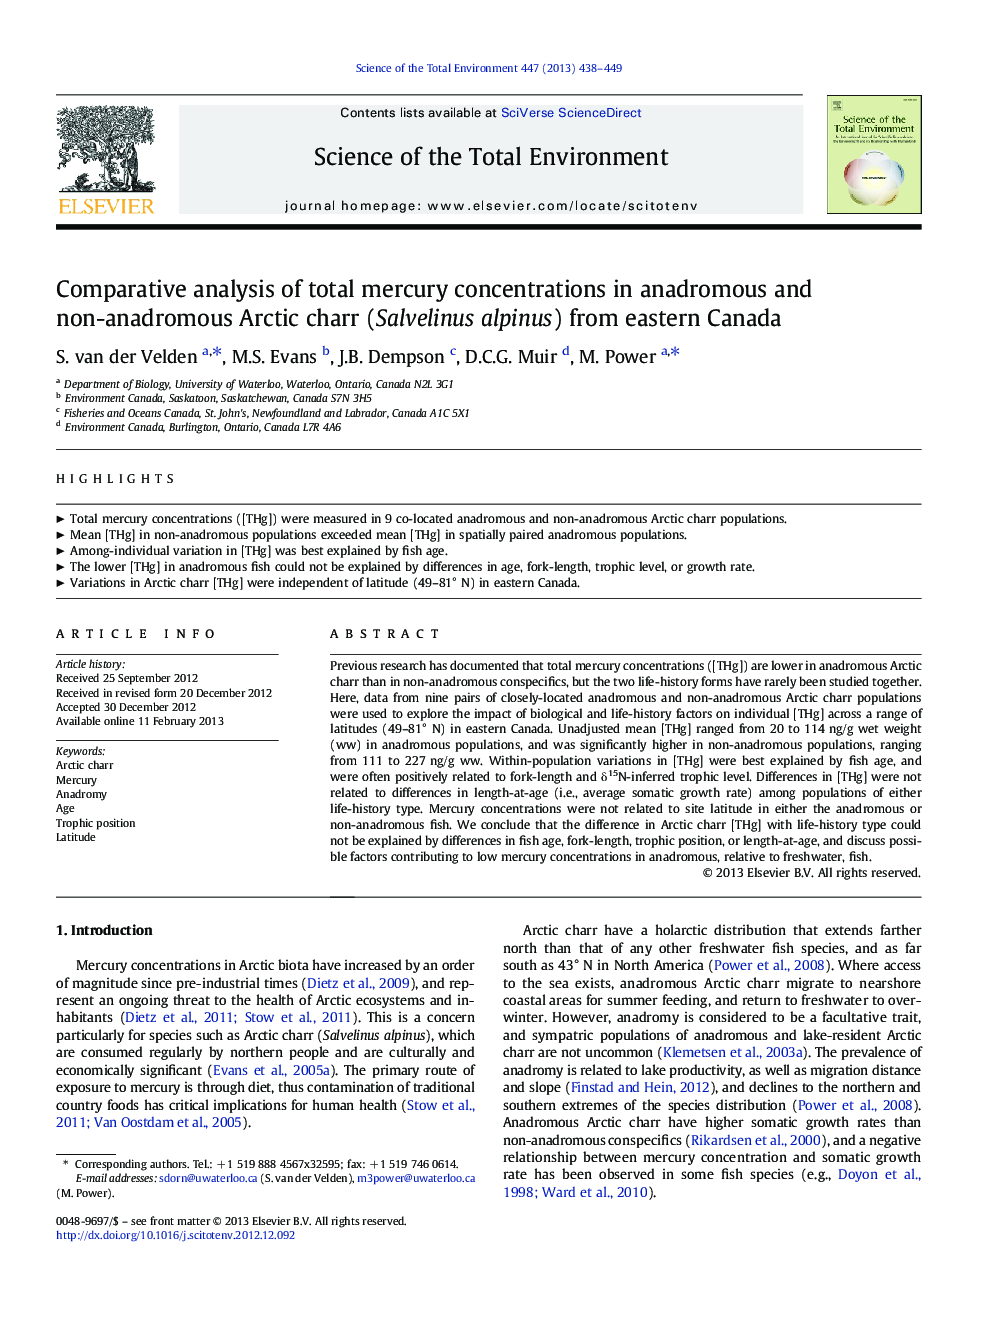 Comparative analysis of total mercury concentrations in anadromous and non-anadromous Arctic charr (Salvelinus alpinus) from eastern Canada